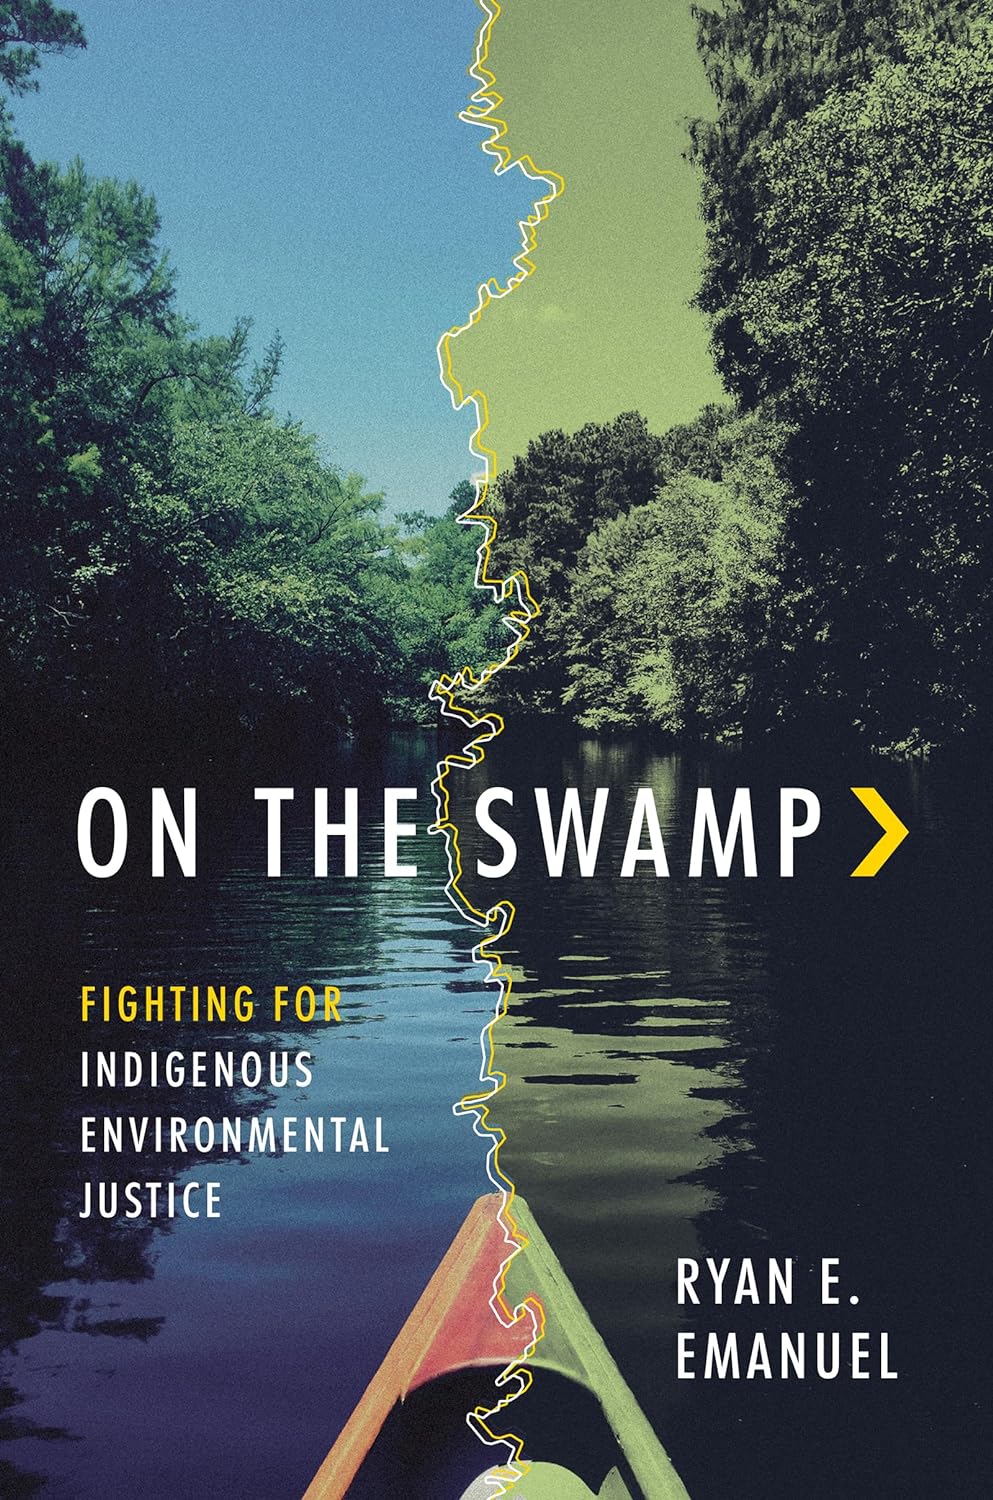 On the Swamp: Fighting for Indigenous Environmental Justice by Ryan E. Emanuel